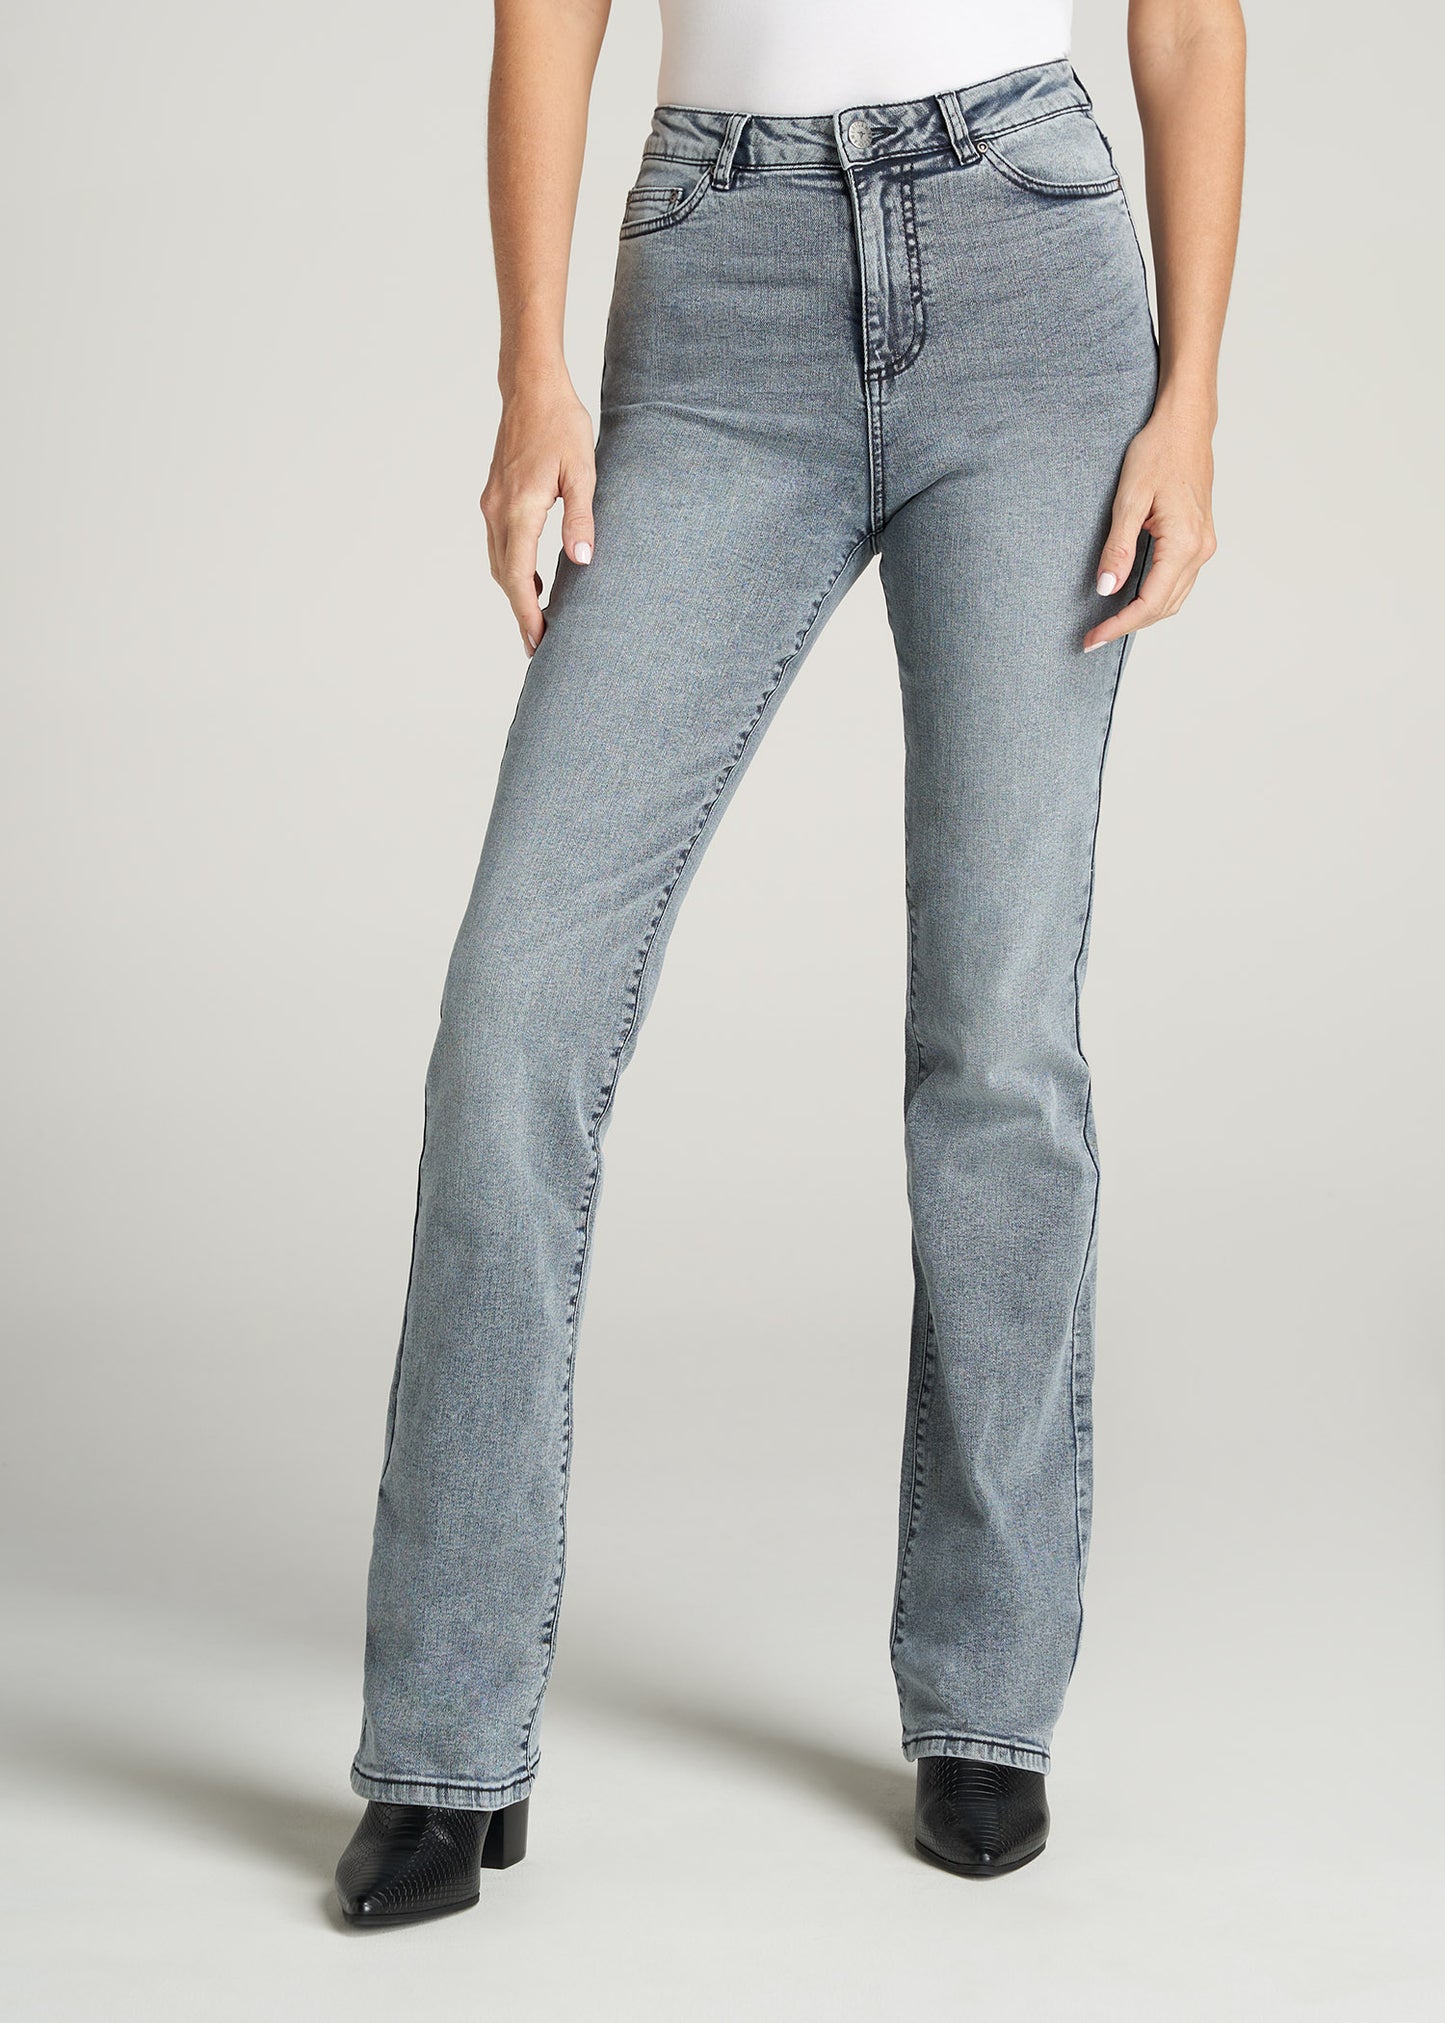 Tall Women's Jeans: Tall Lady Britney Light Grey Bootcut Jeans